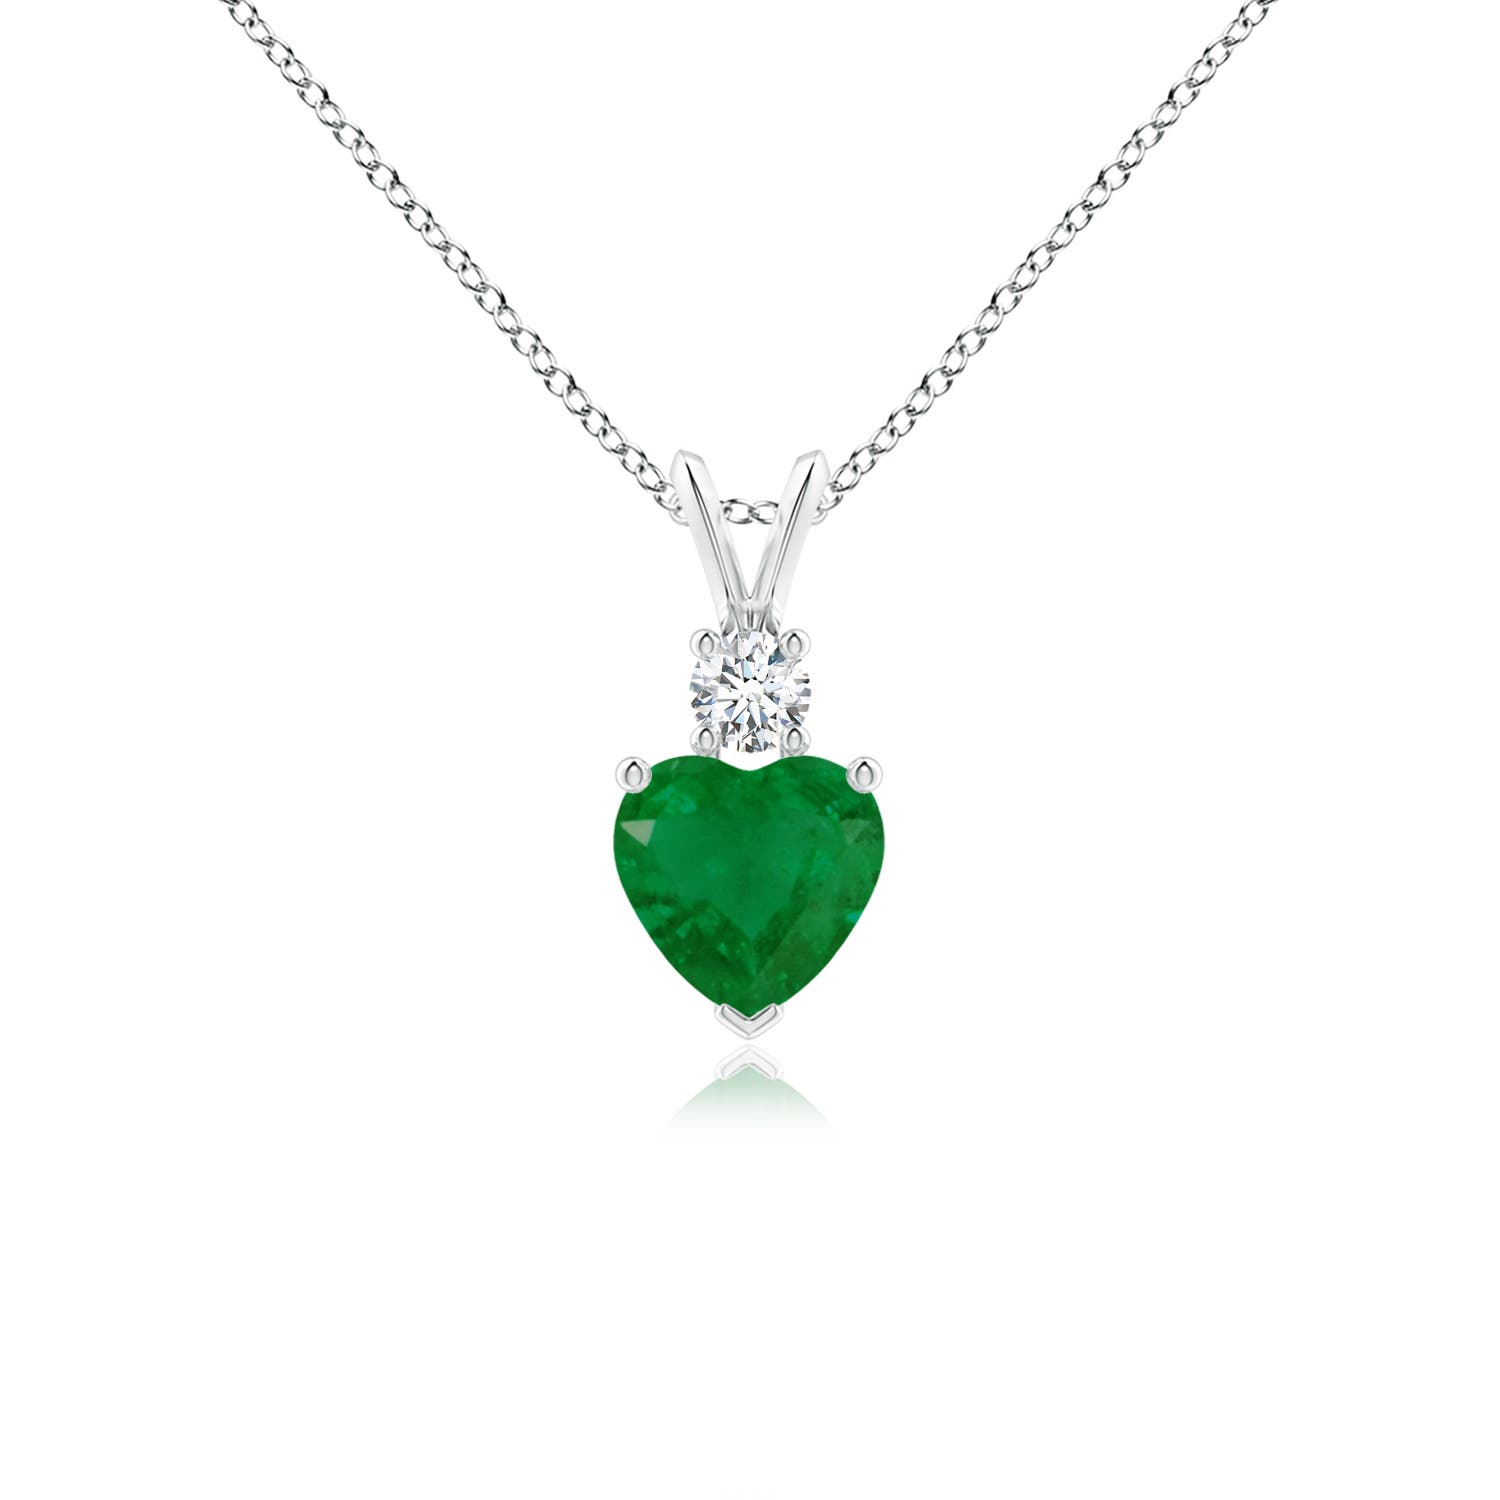 A - Emerald / 0.68 CT / 14 KT White Gold